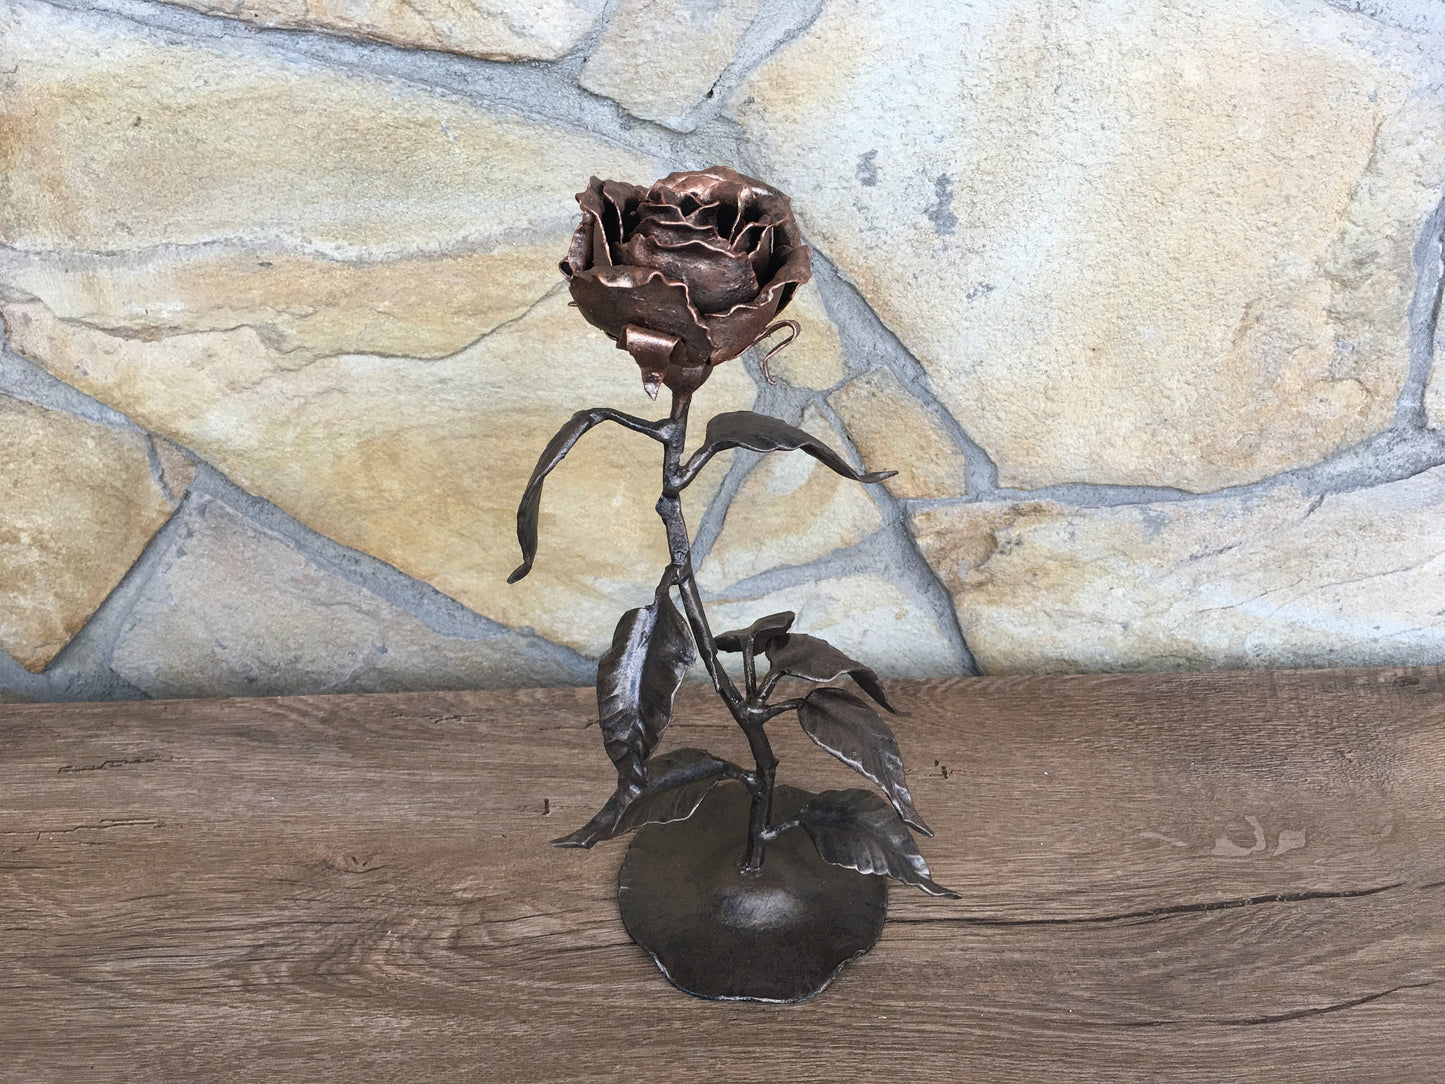 Hand forged rose, engagements gift for couple, engagement gift idea, engagement gift, wedding anniversary, wedding gift, metal gift for her